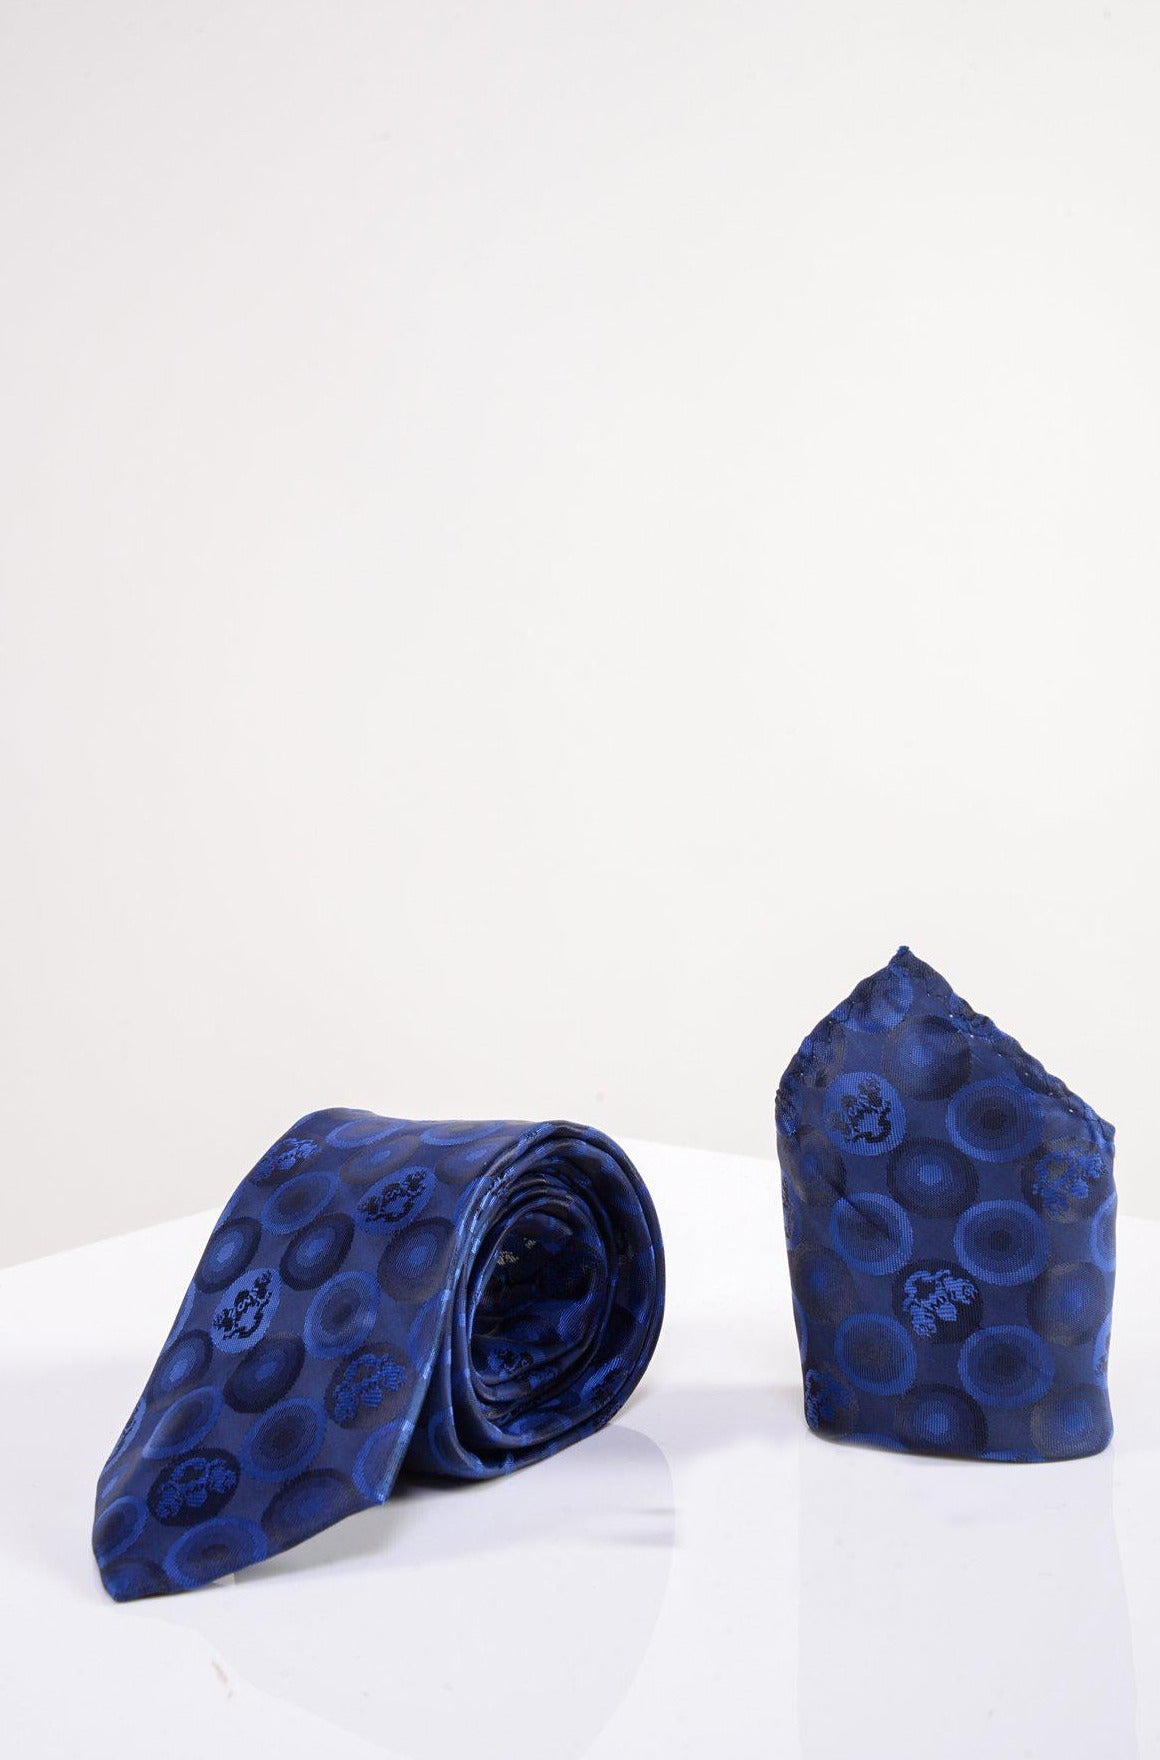 Marc Darcy Bubbles Circle Print Tie and Pocket Square Set Navy